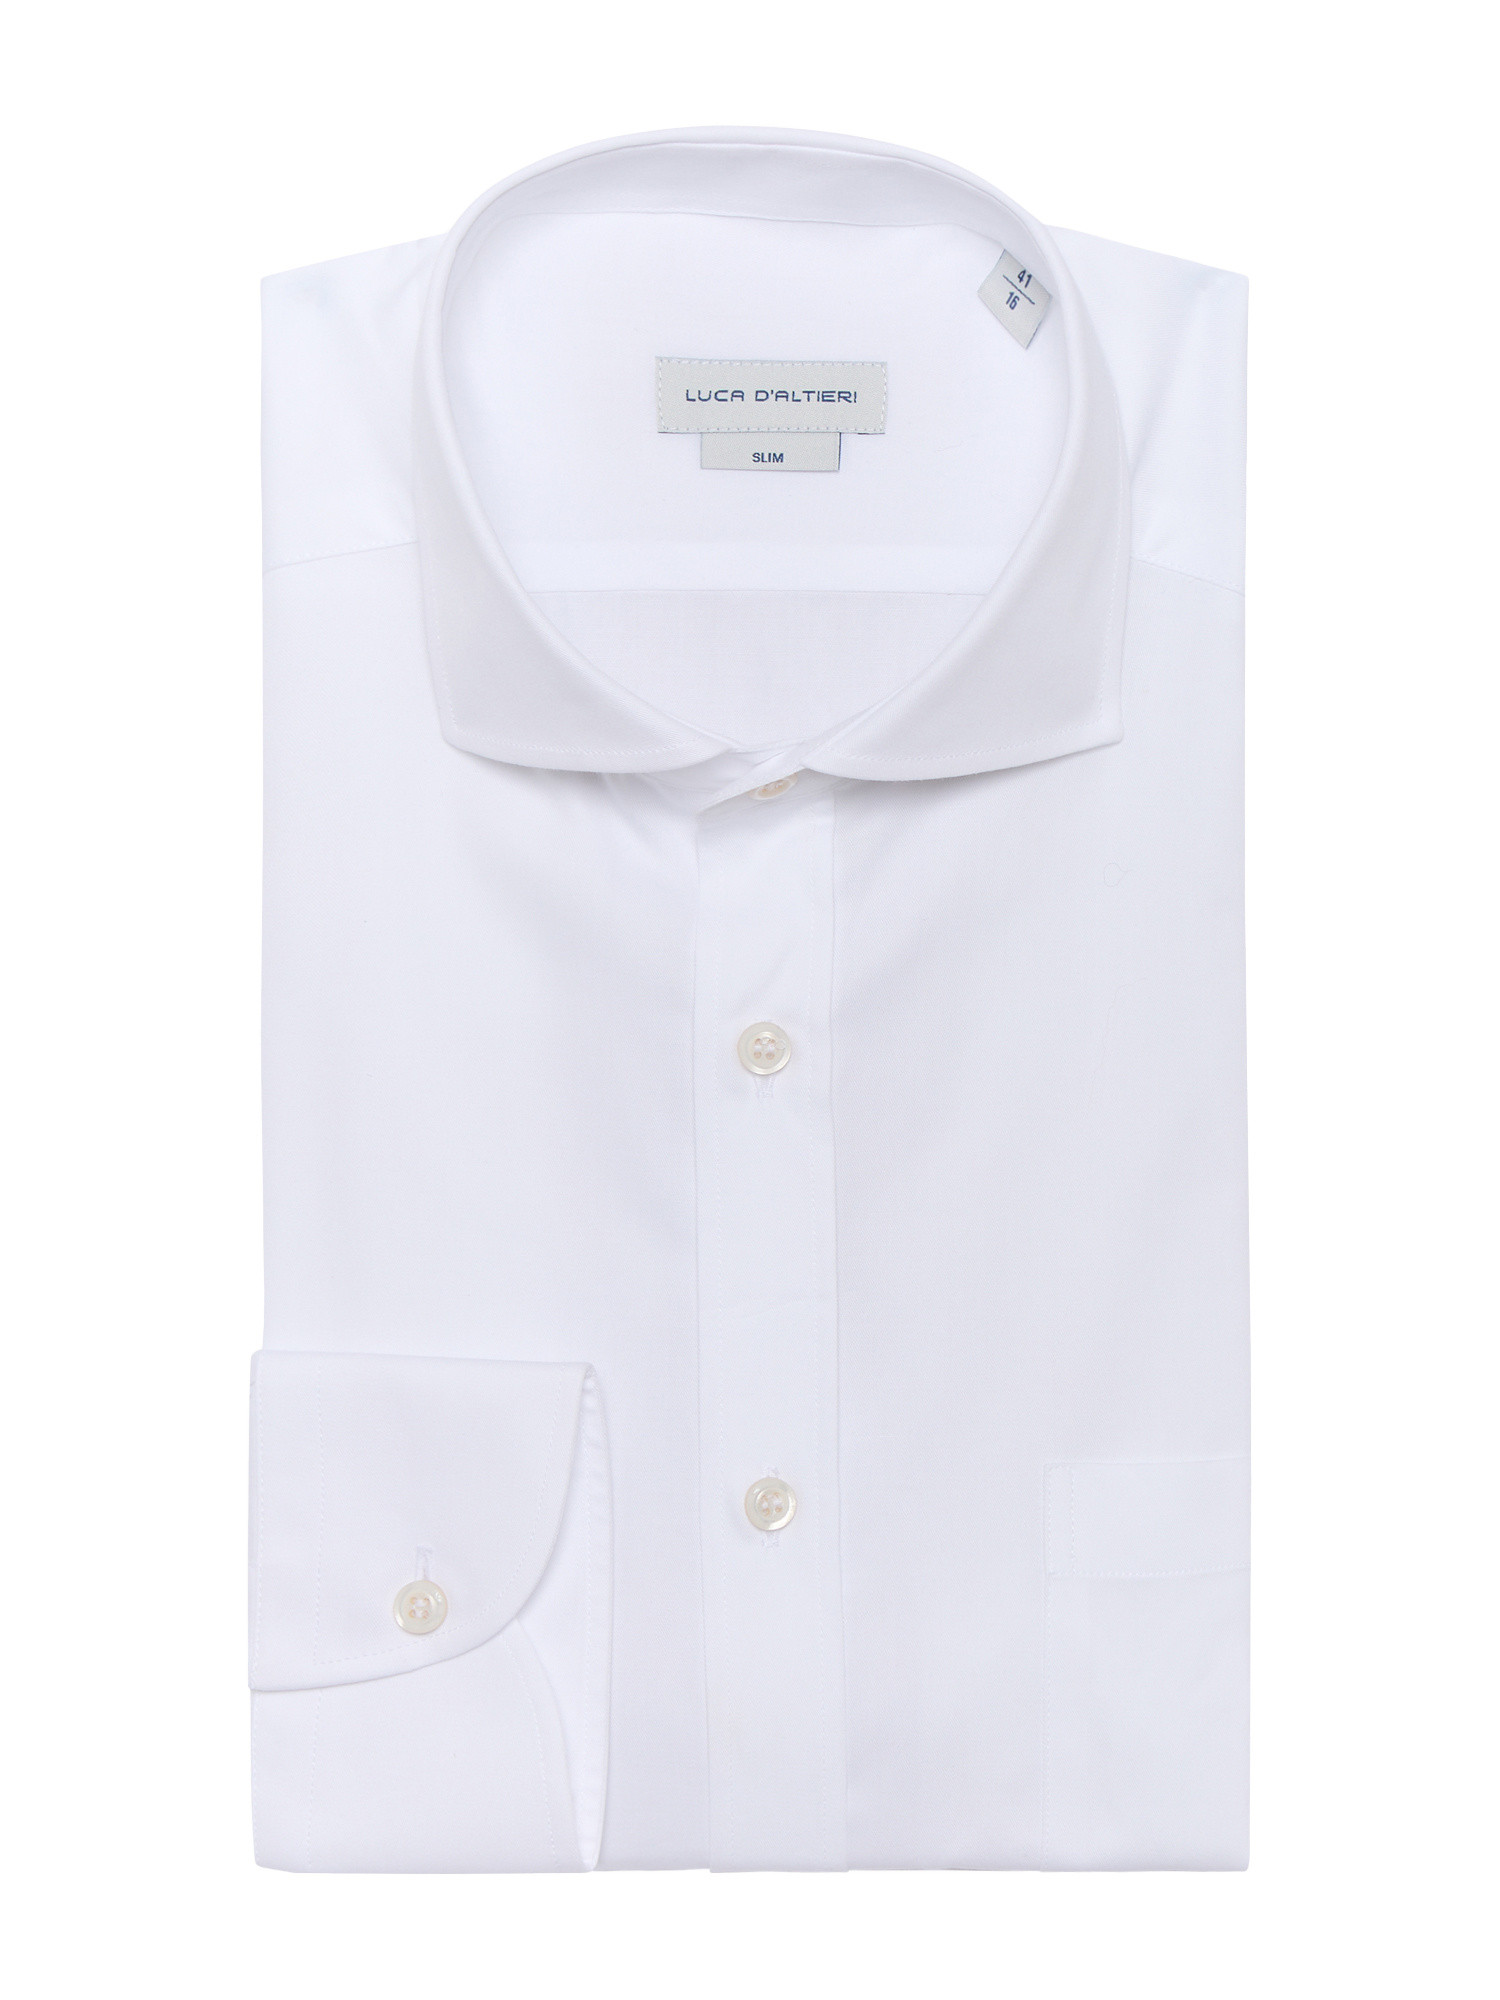 Luca D'Altieri - Casual slim fit shirt in pure cotton twill, White, large image number 0